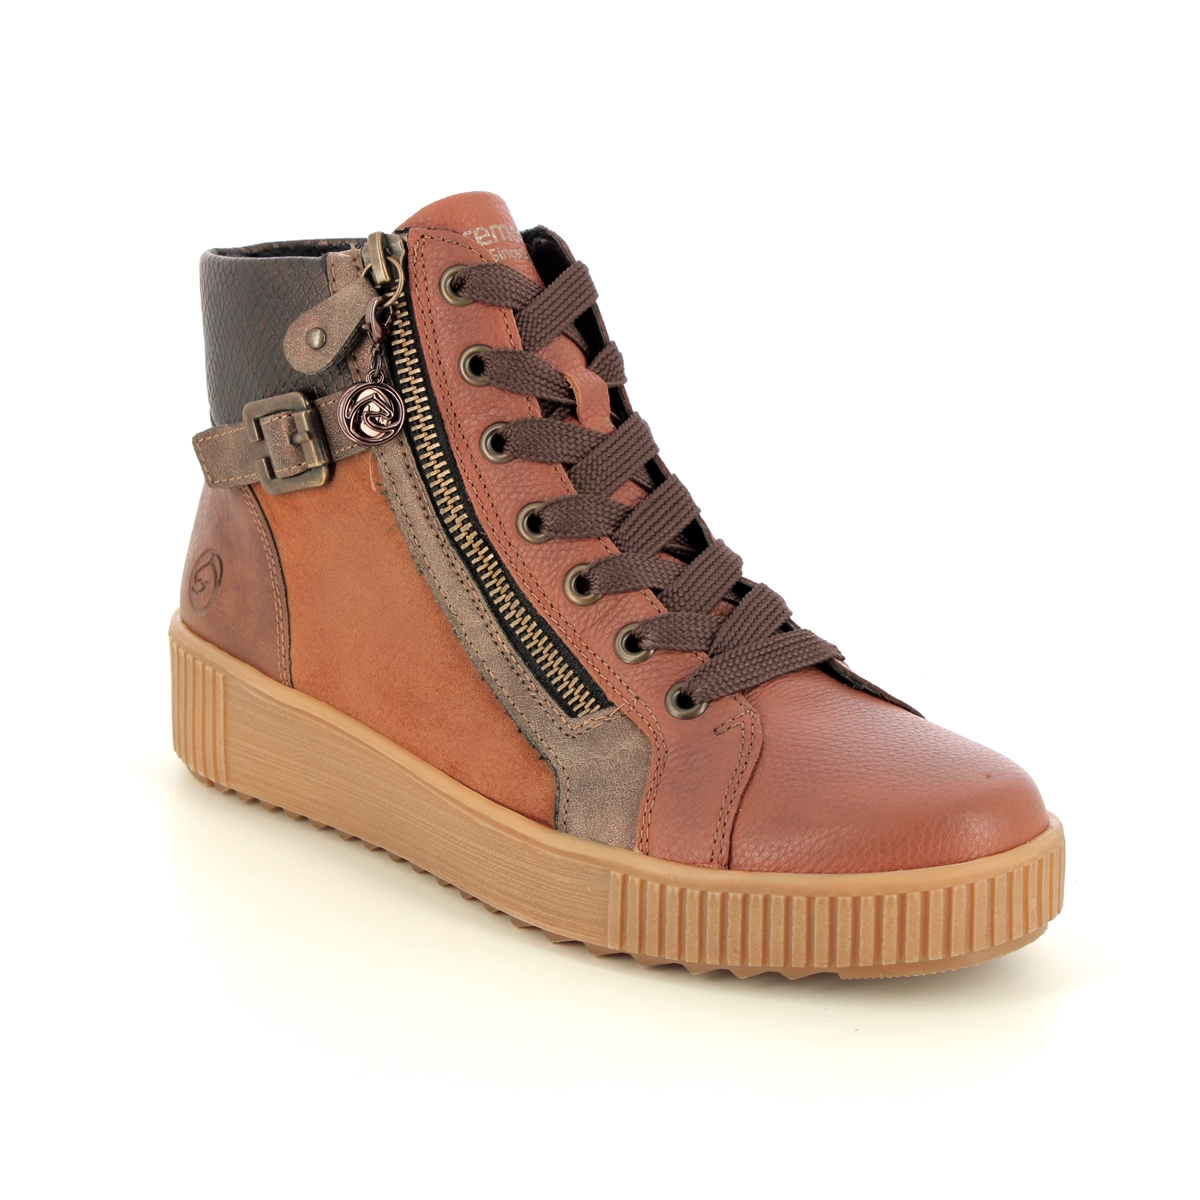 Remonte Durlozip Elle Tan Leather Womens Hi Tops R7997-24 In Size 38 In Plain Tan Leather